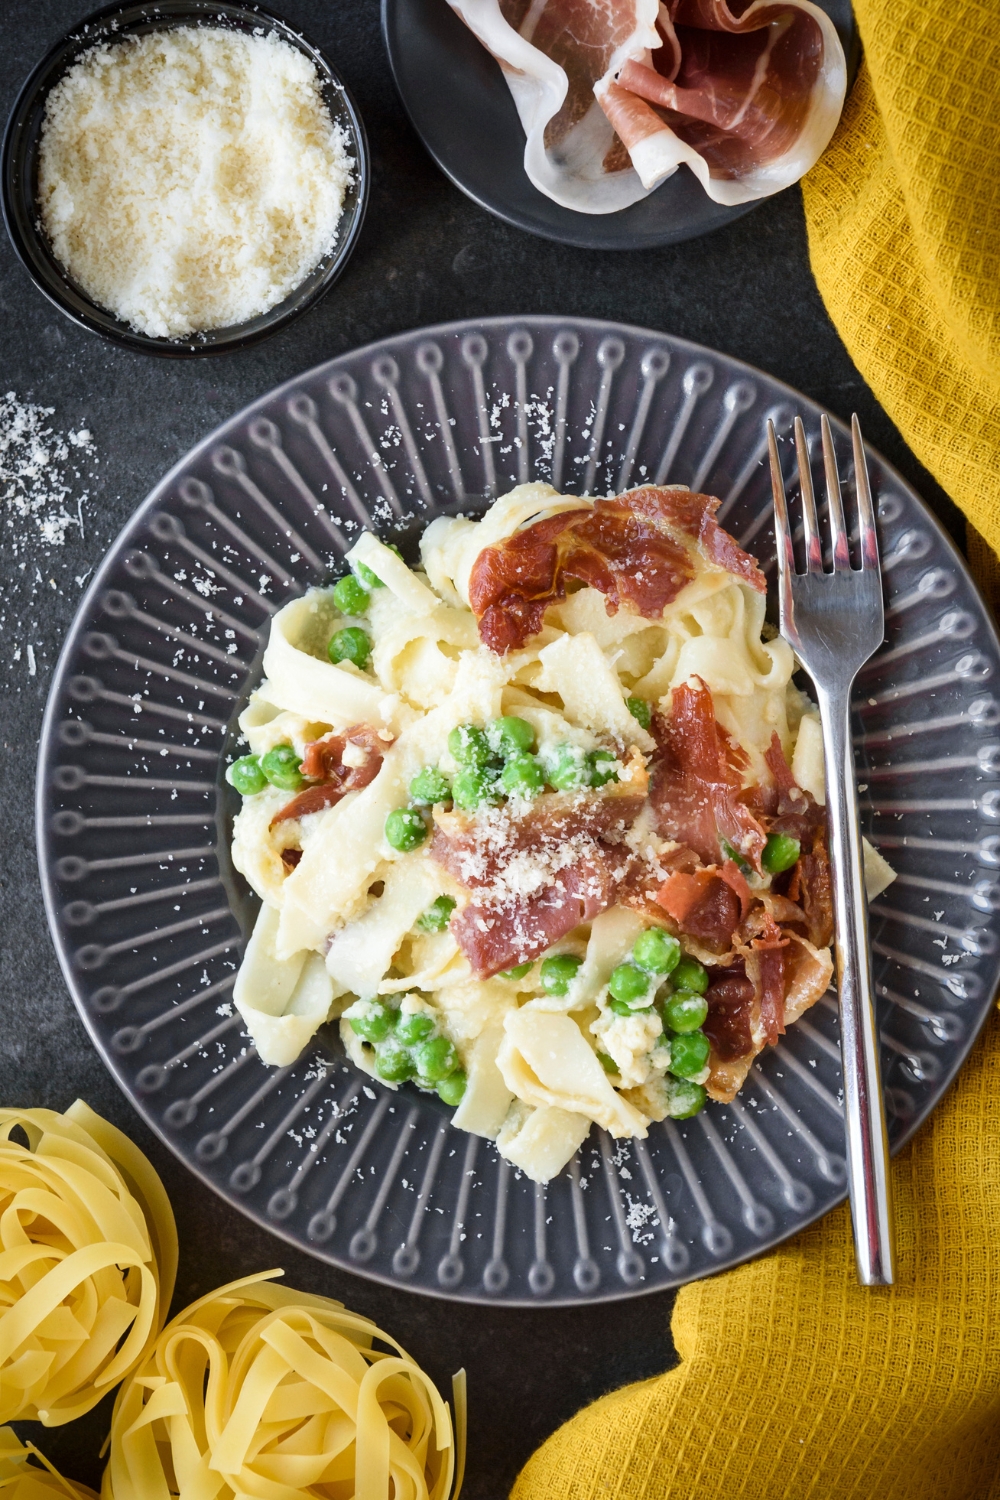 A plate filled with cooked pasta mixed with peas and prosciutto in a creamy sauce with cheese on top.